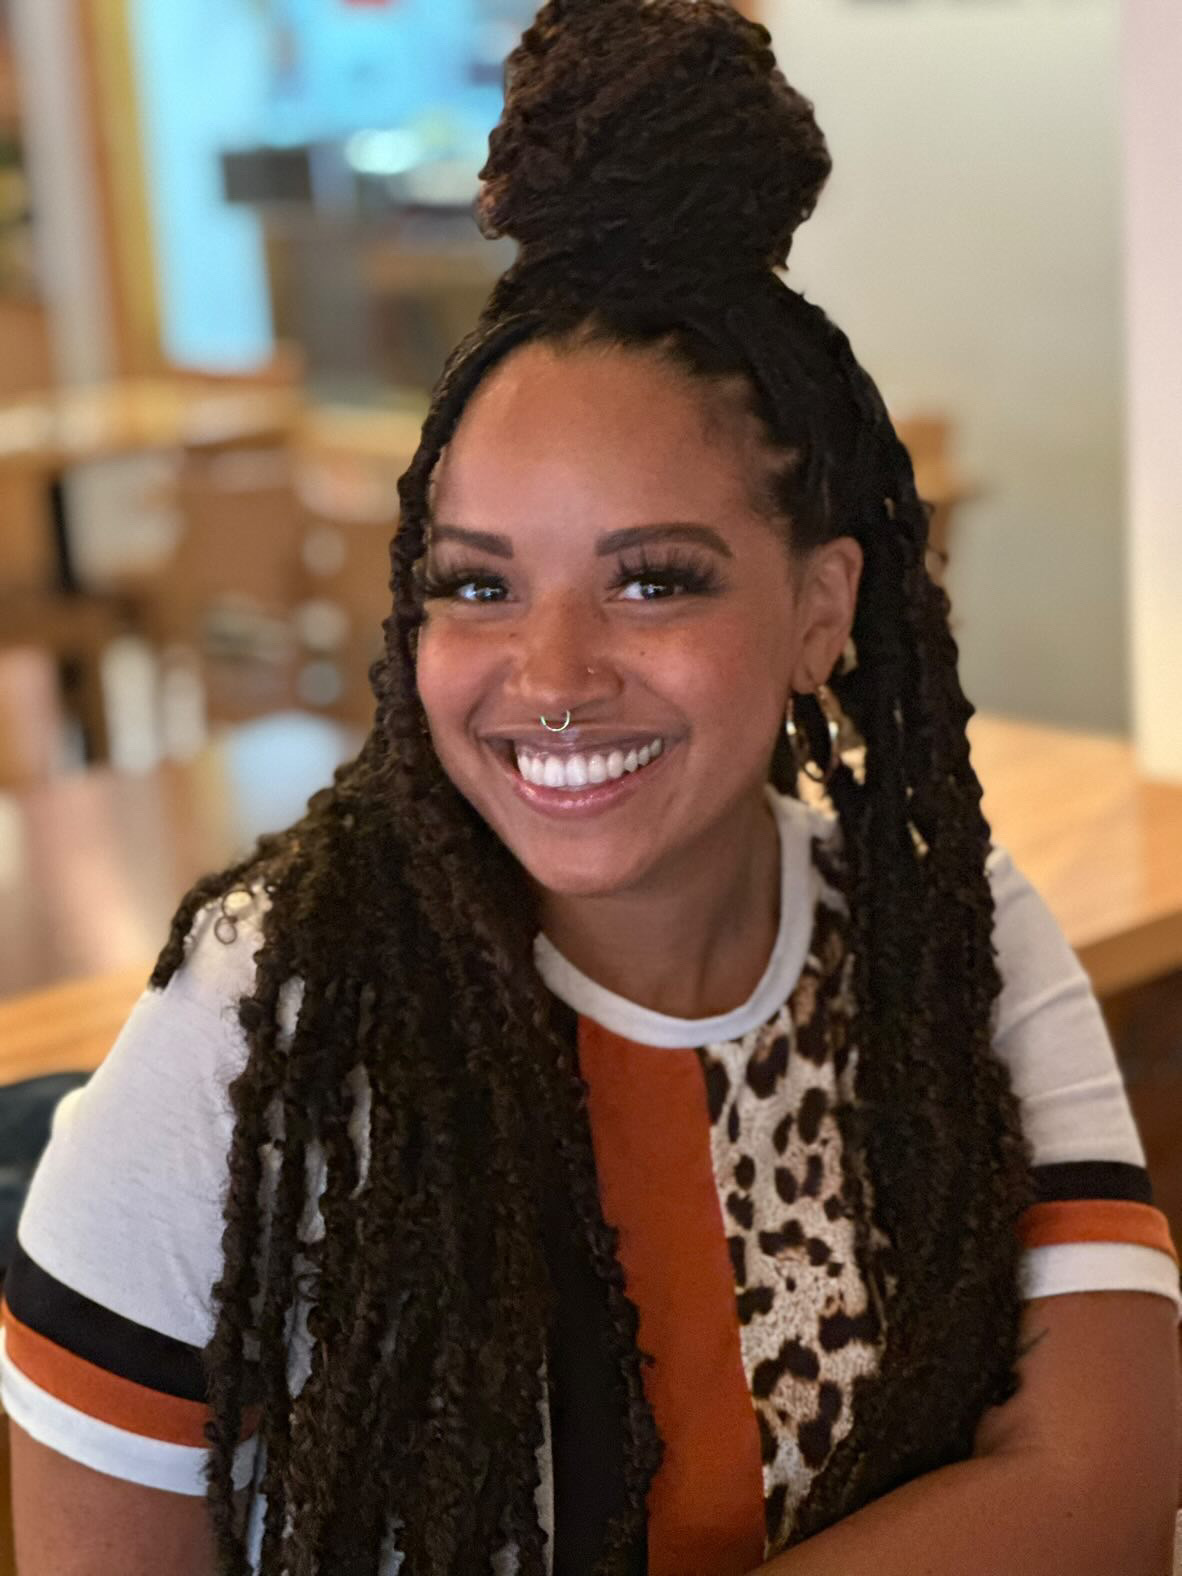 Kiara Lee-Benton is smiling with hair half up in a bun and the rest cascading down her shoulders. She is wearing a white shirt with black and brown stripes and leopard print.